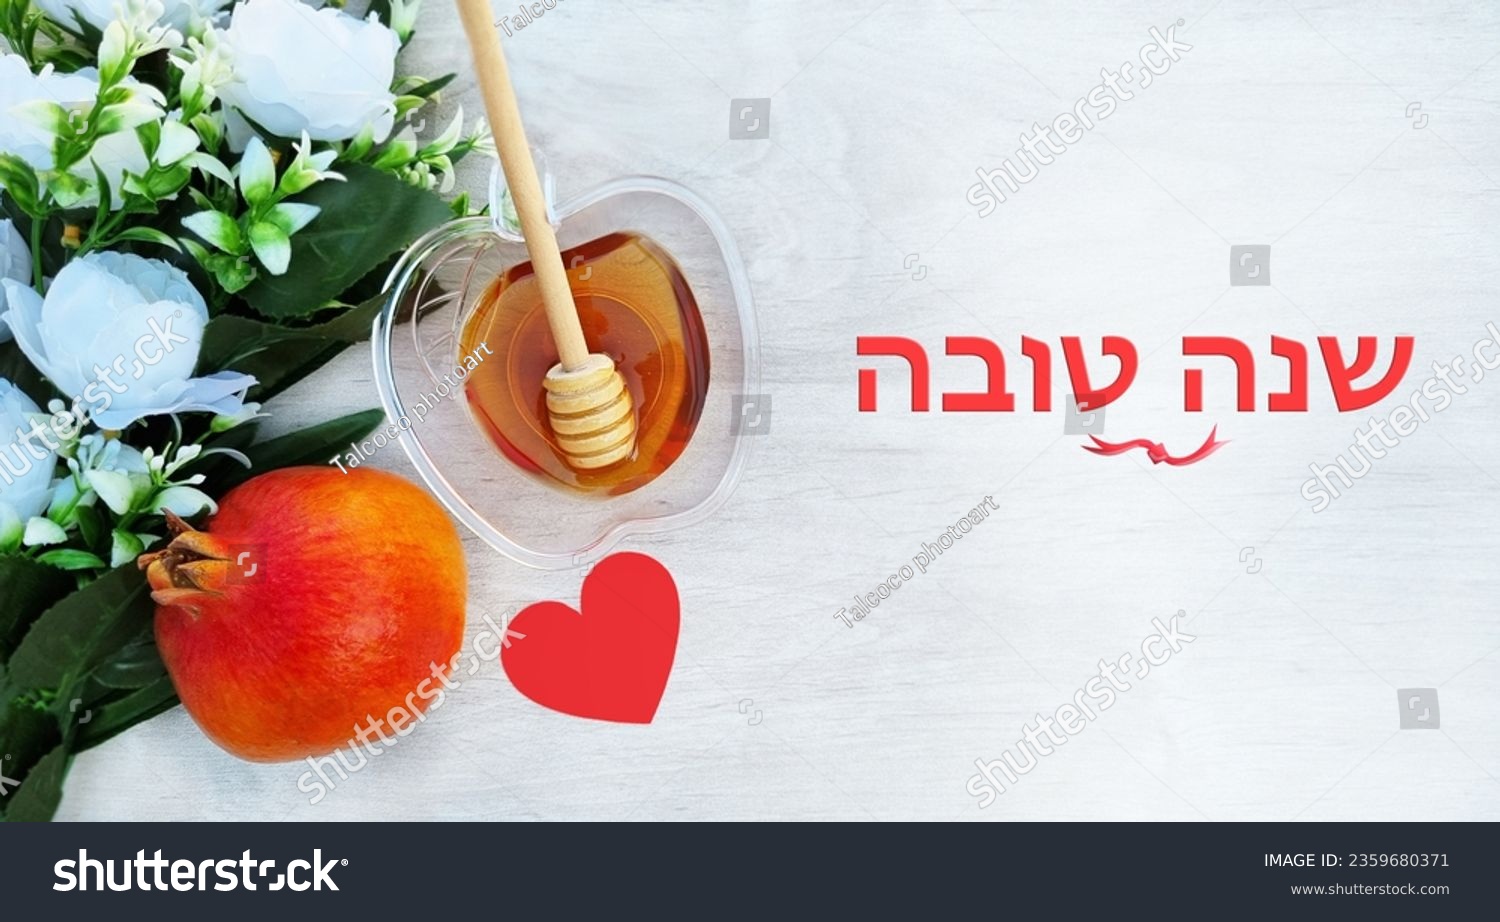 Translation title: Happy New Year. in Hebrew
pomegranate, rimmon, Honey and white flowers with love on a white white wooden surface . Rosh Hashanah holiday. Suitable for shana tova greeting card  #2359680371